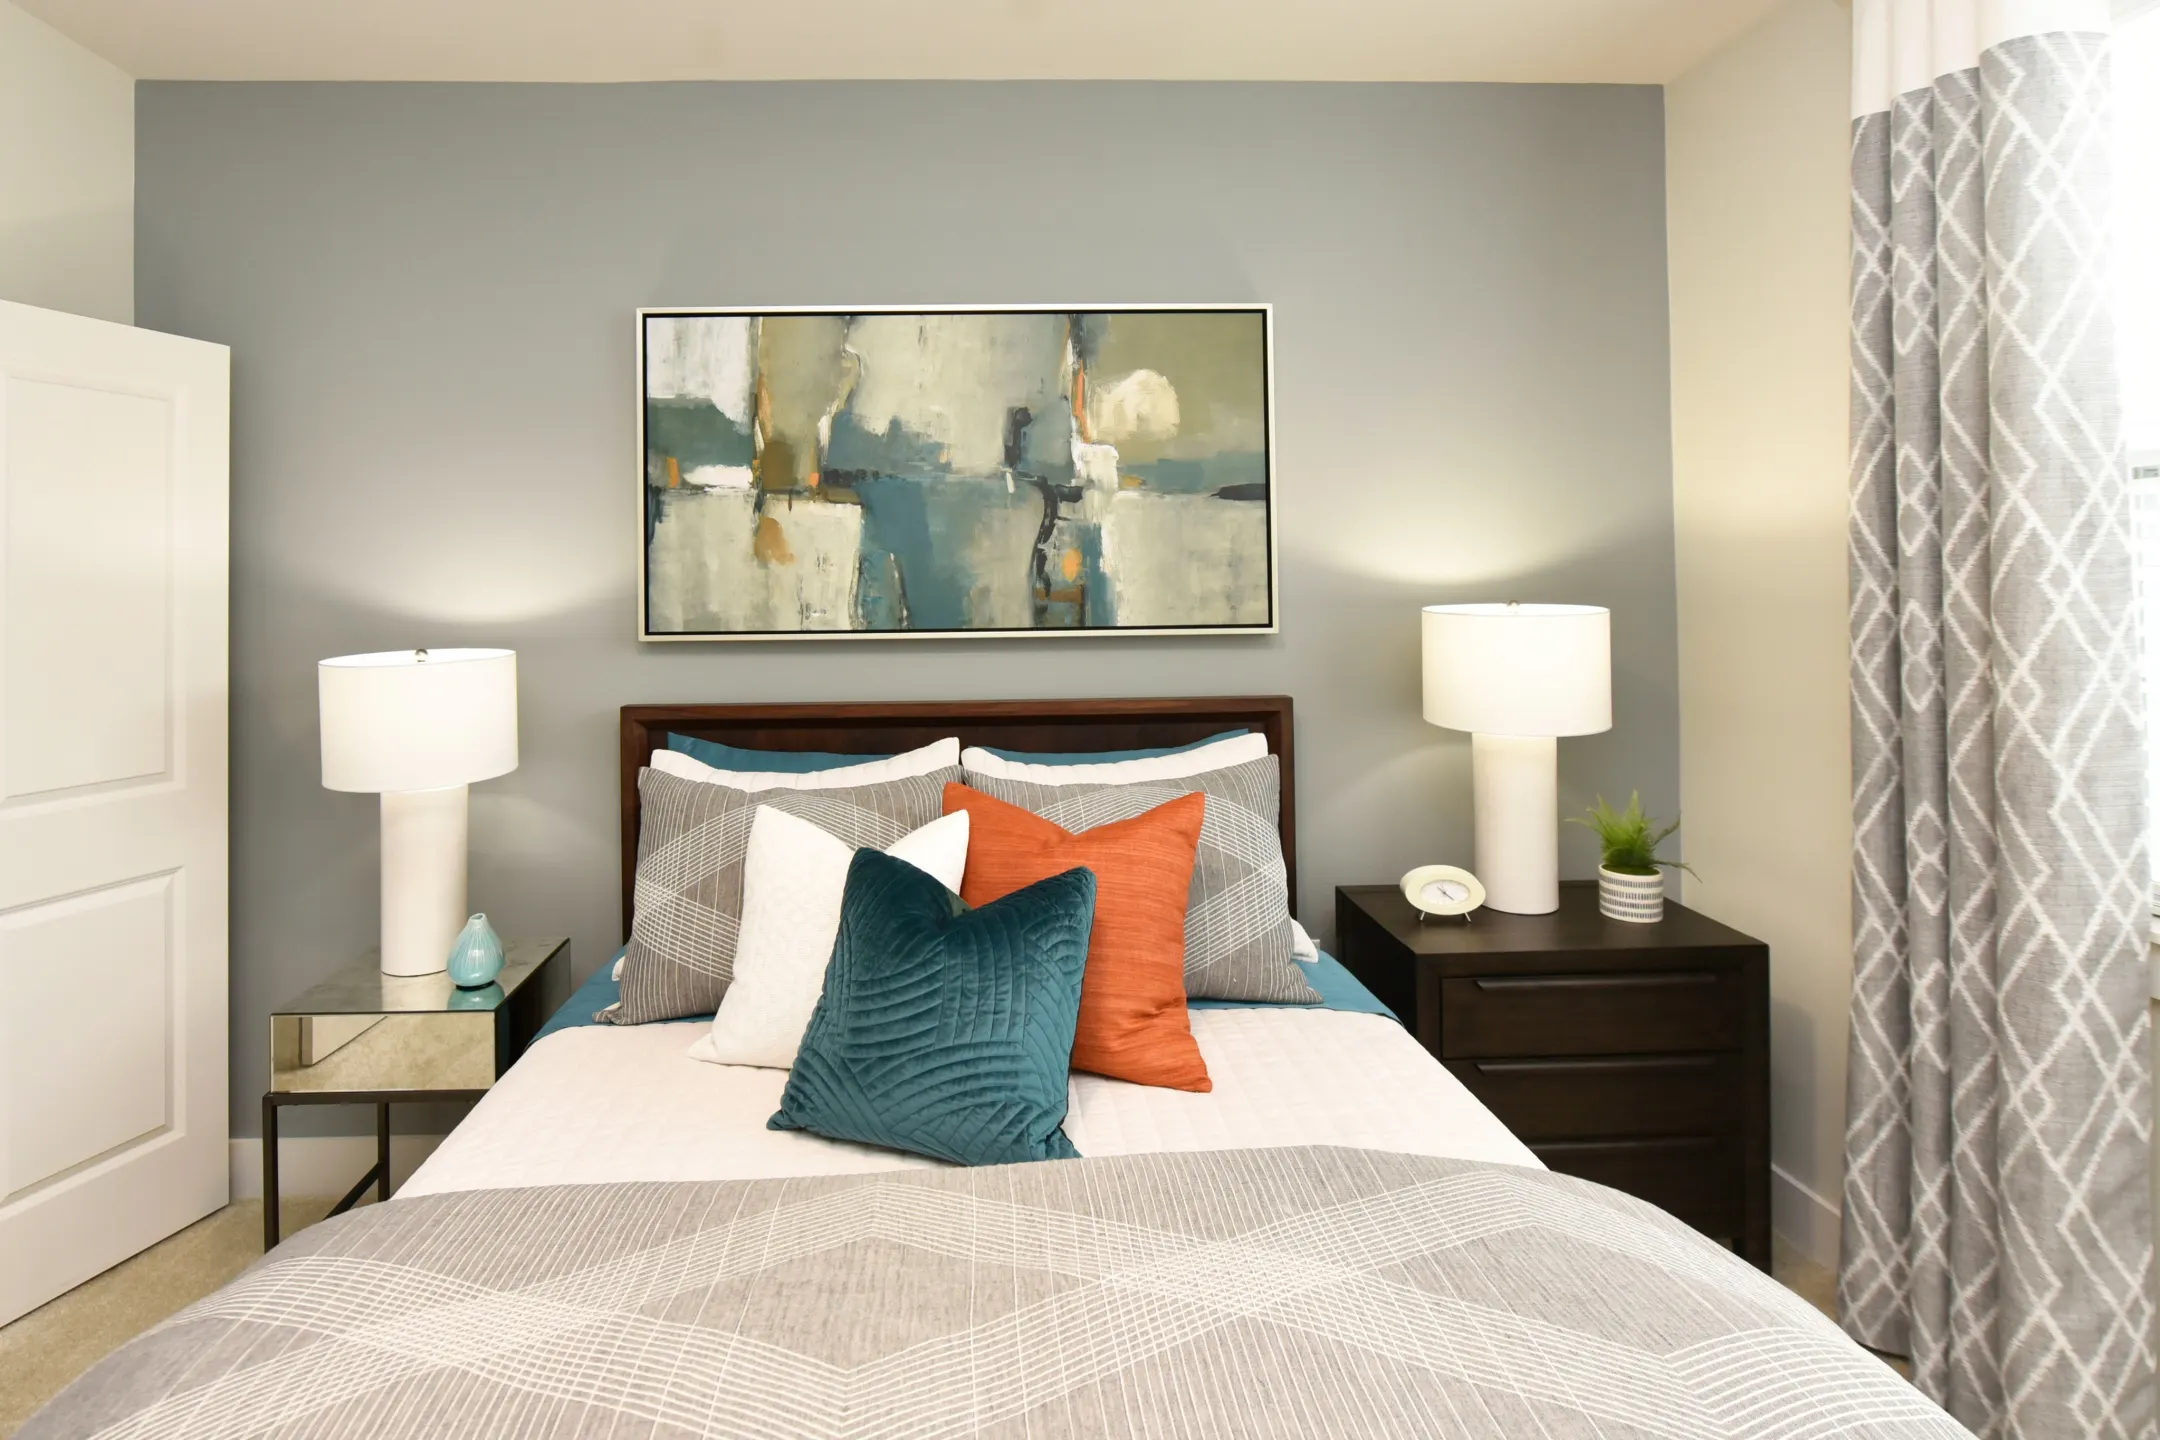 Bedroom - Solana Apartments At The Crossing - Indianapolis, IN